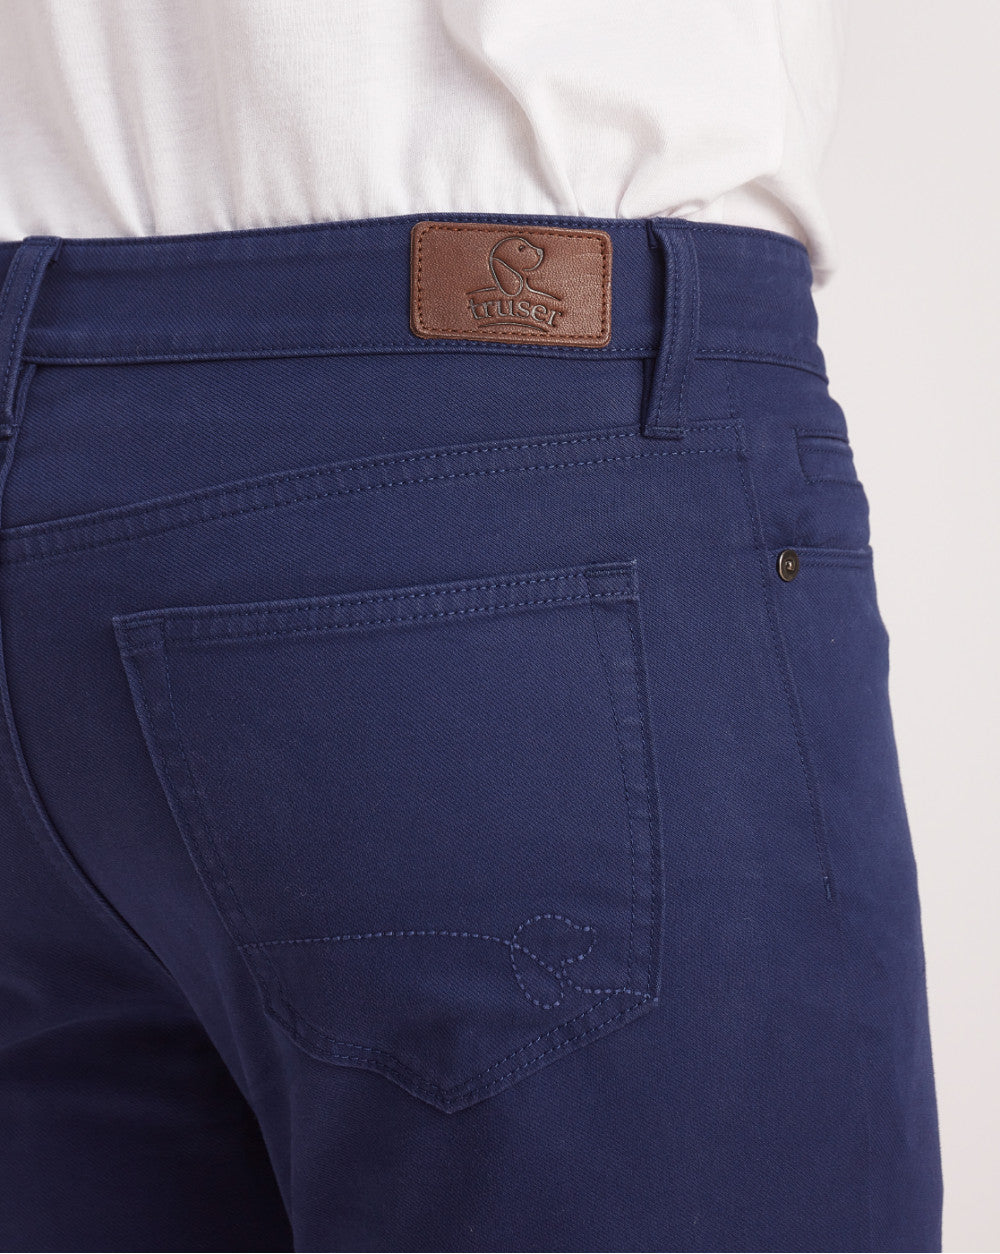 Skinny Fit Five-Pocket Luxe Pants - Bright Navy